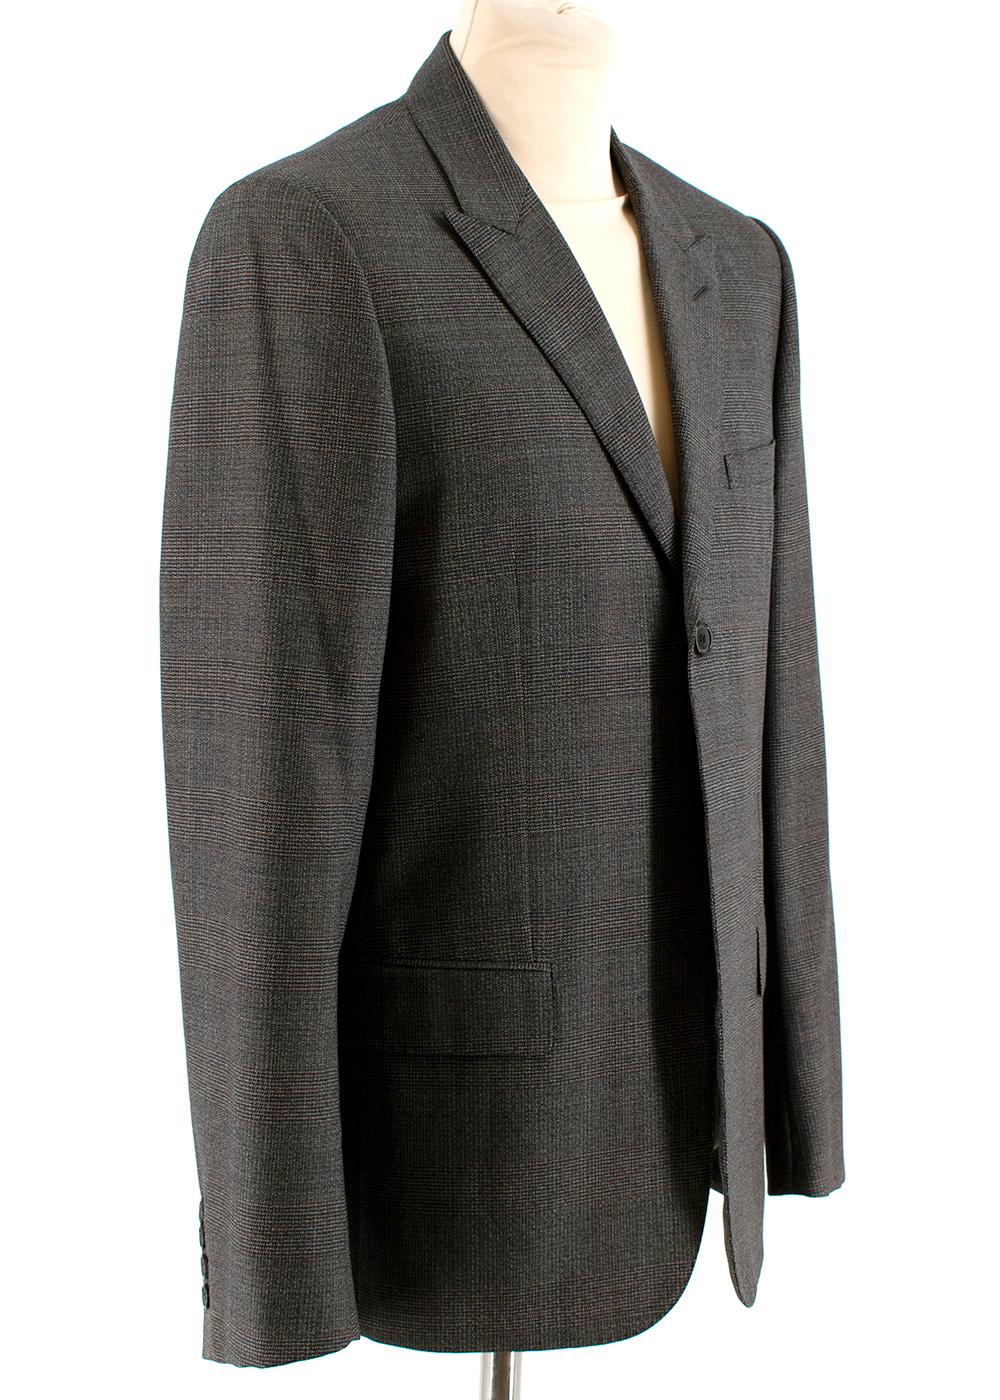 Dior Grey Wool Houndstooth Check Single Breasted Blazer

- Soft virgin wool 
- Single breasted blazer
- Single button fastening
- Grey houndstooth check 
- Buttoned cuffs 
- Notched lapel
- False front welt and flap pockets 
- Inner breast pockets
-